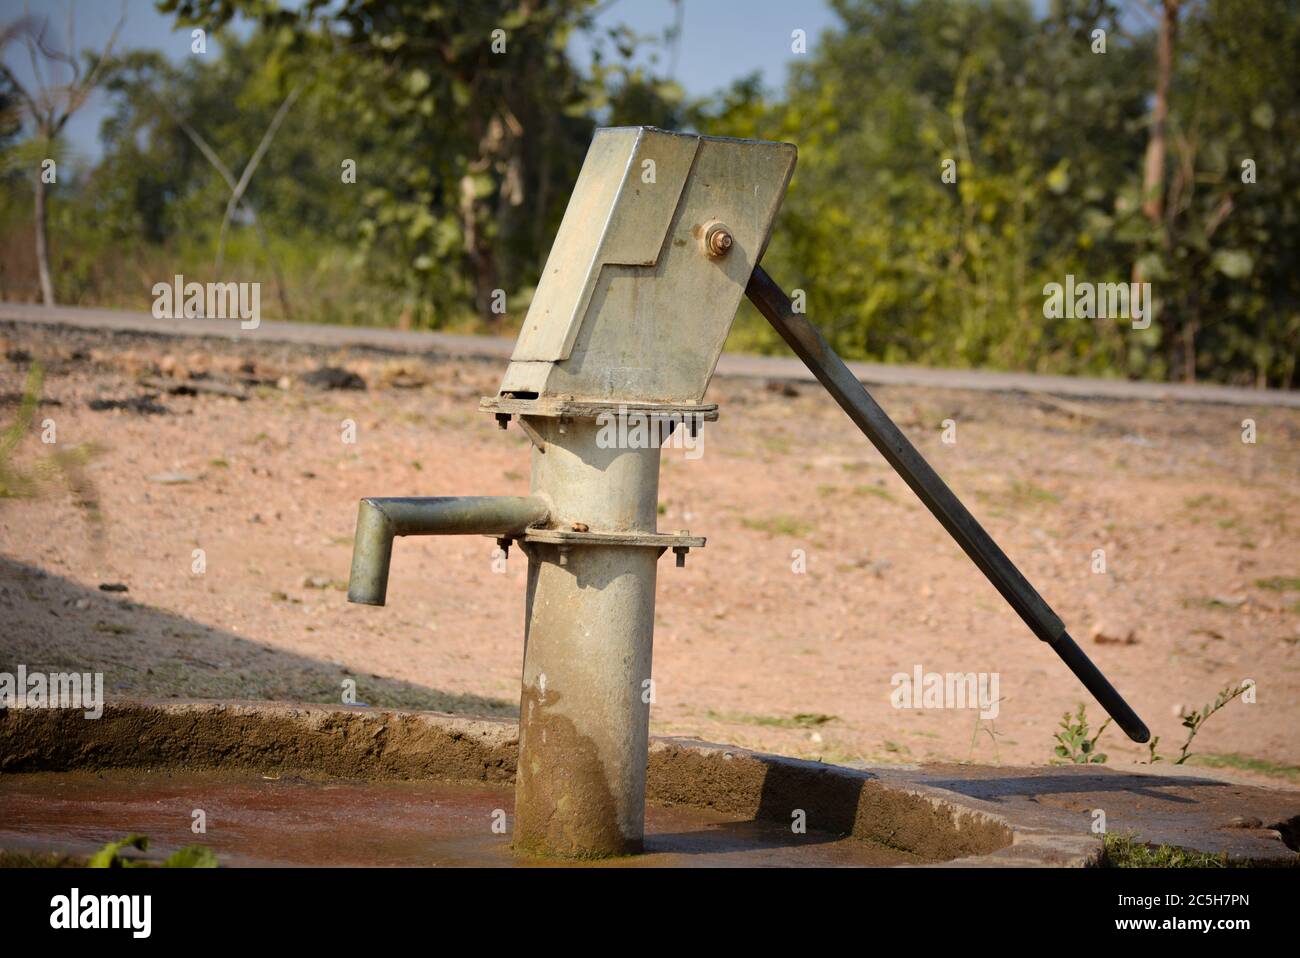 Old hand operated water pump in rural India Stock Photo